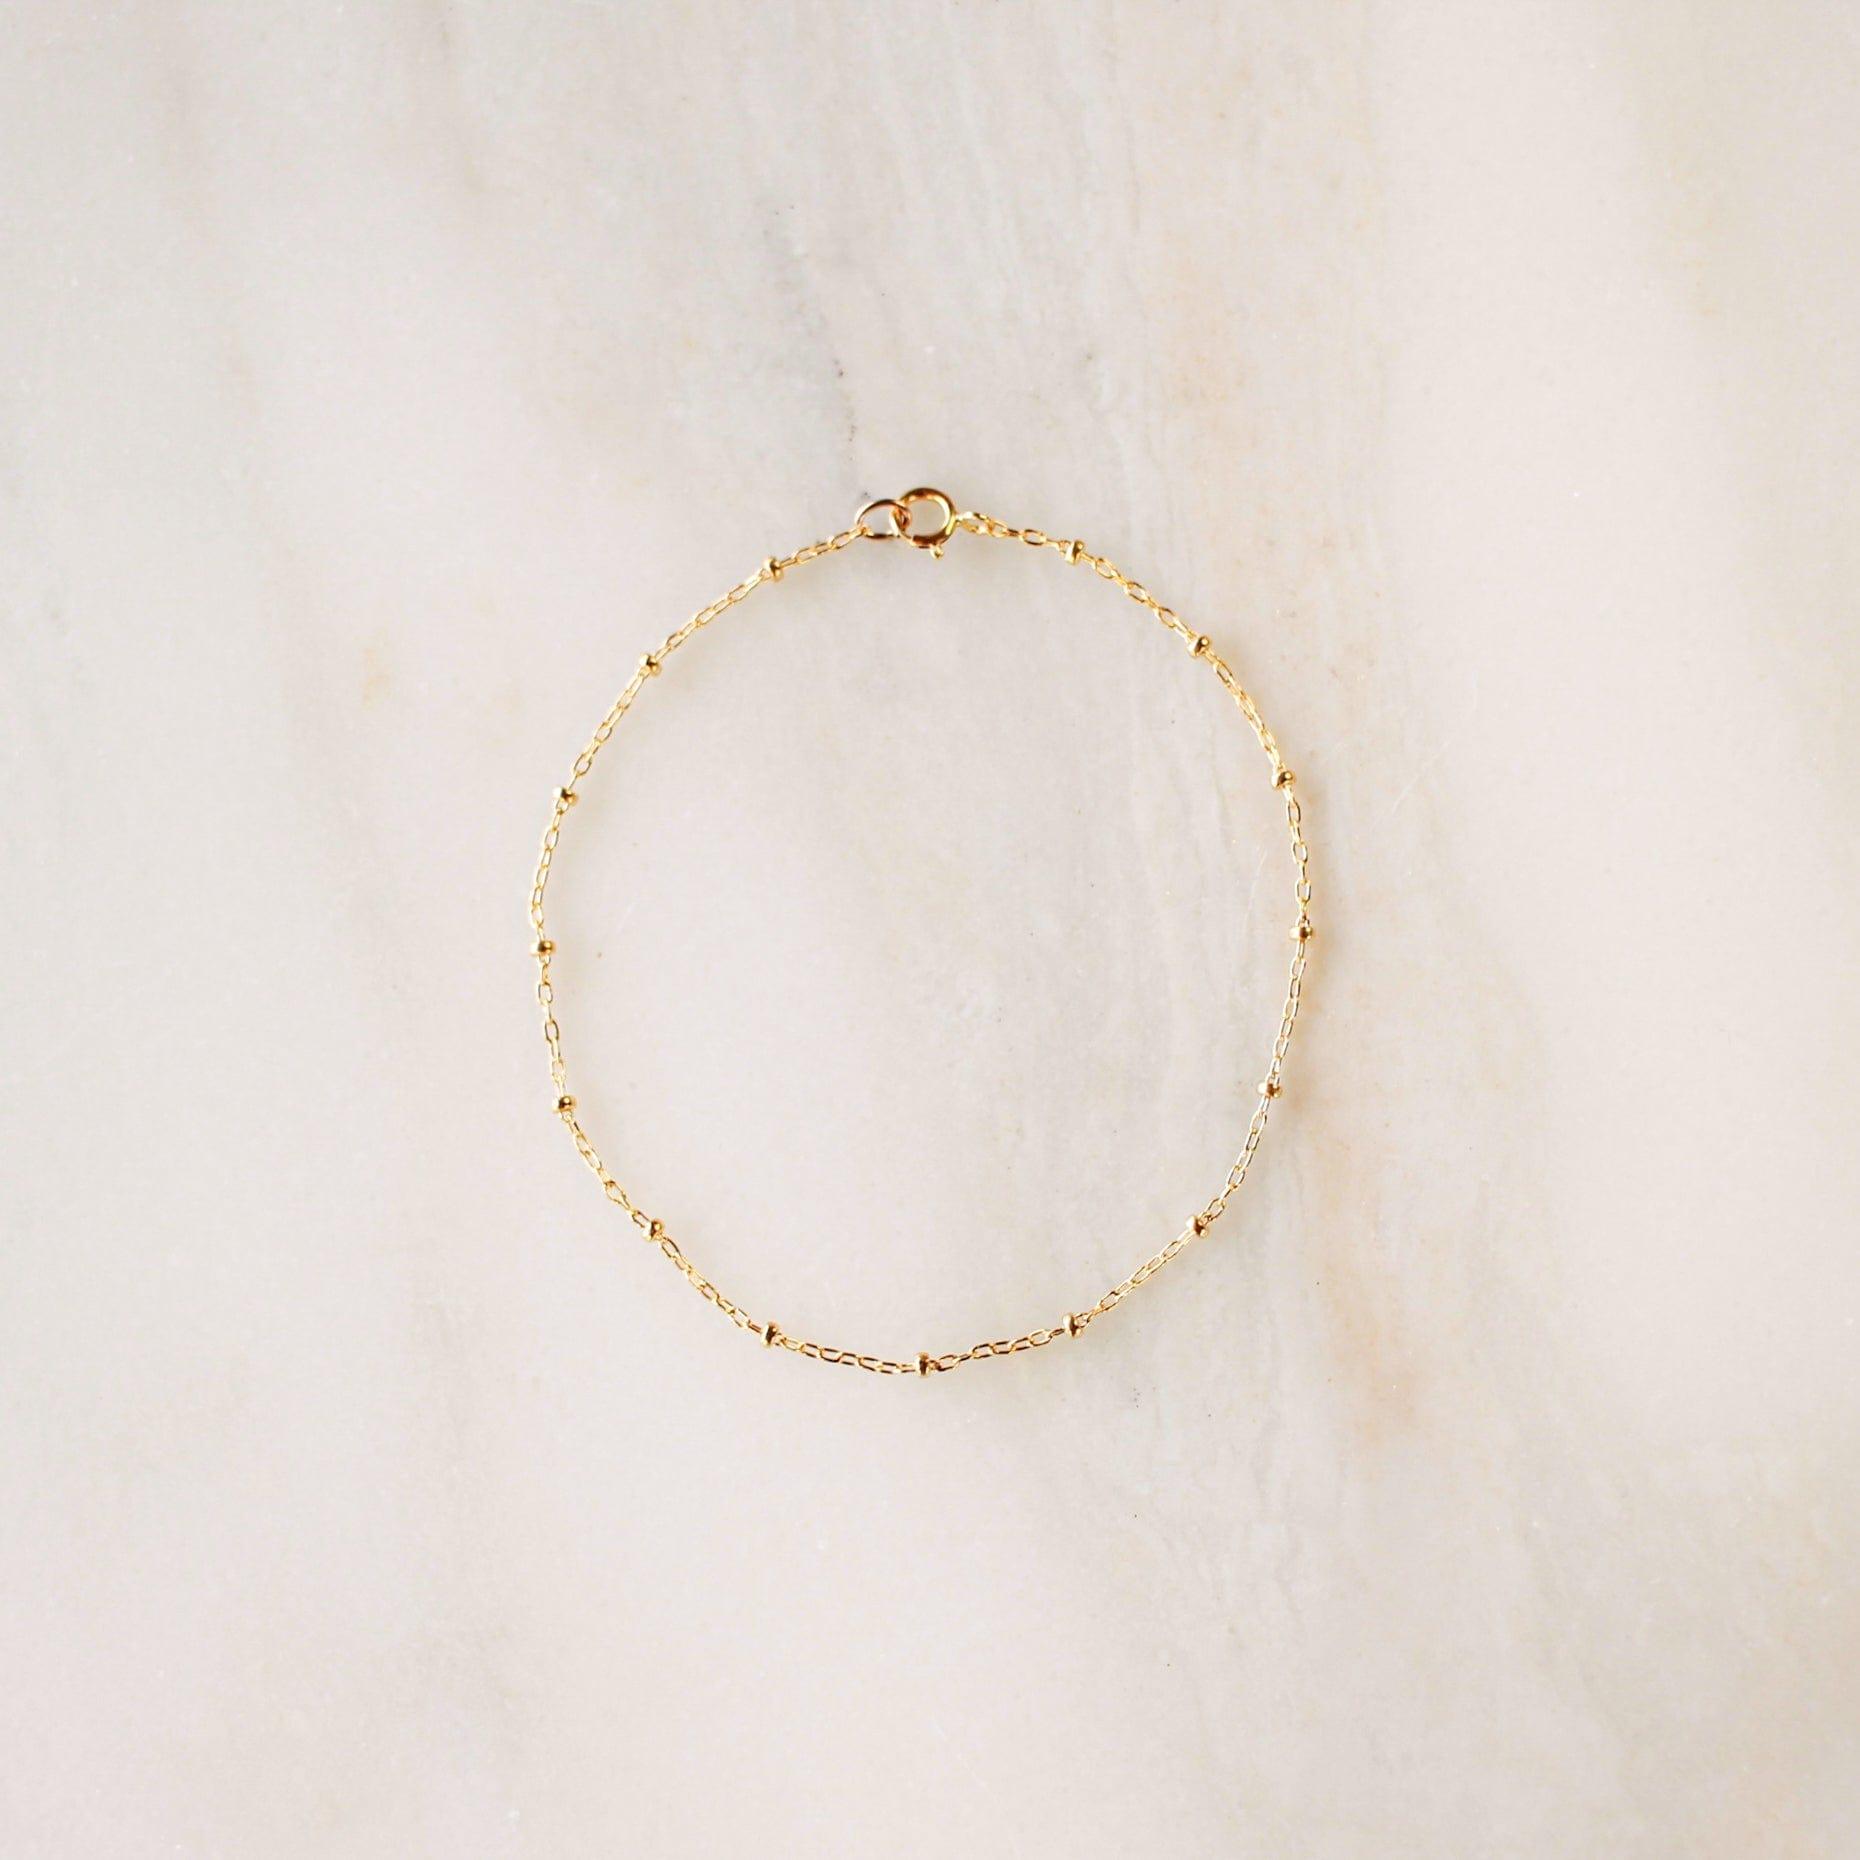 Satellite Chain Bracelet - Nolia Jewelry - Meaningful + Sustainably Handcrafted Jewelry